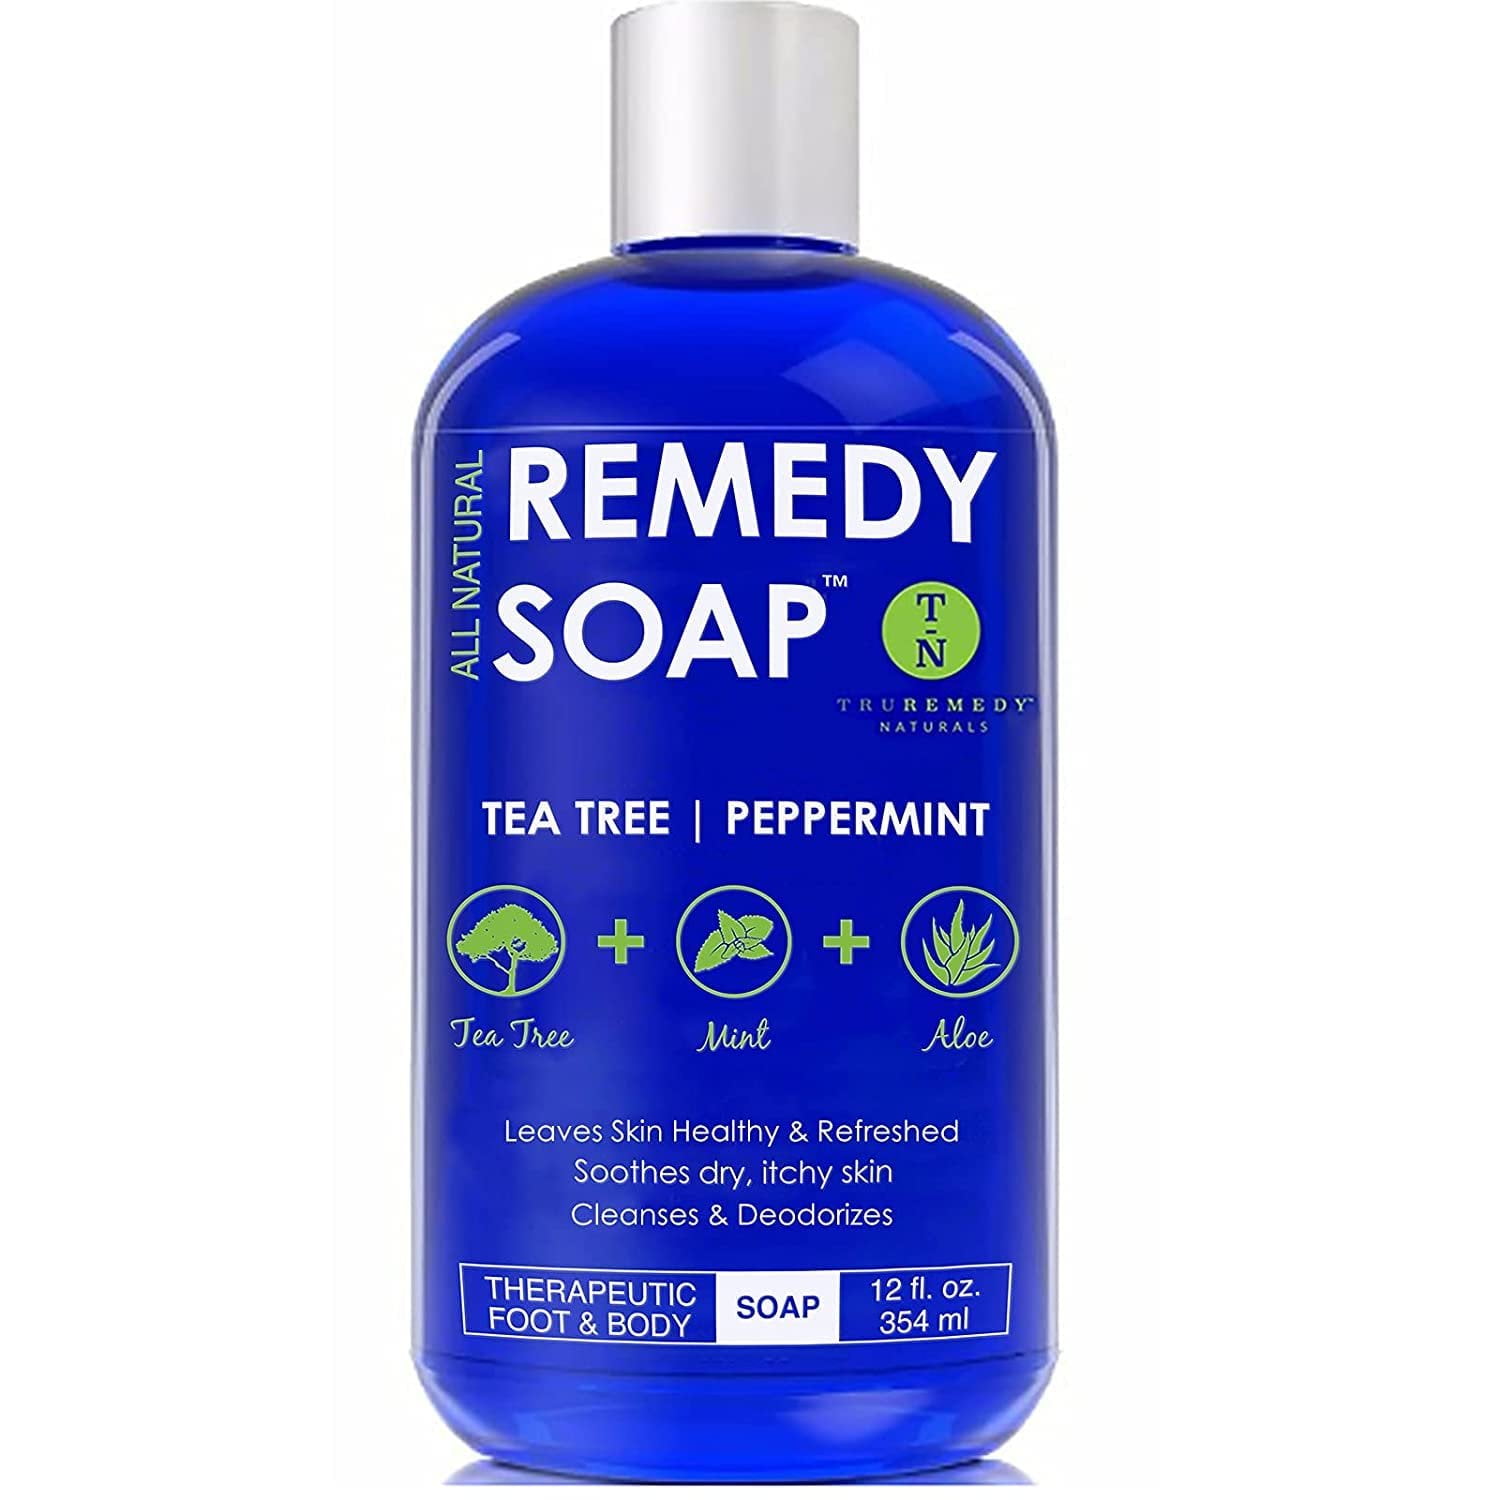 Some of my favorite anti-chafing solutions! - Remedy Soap